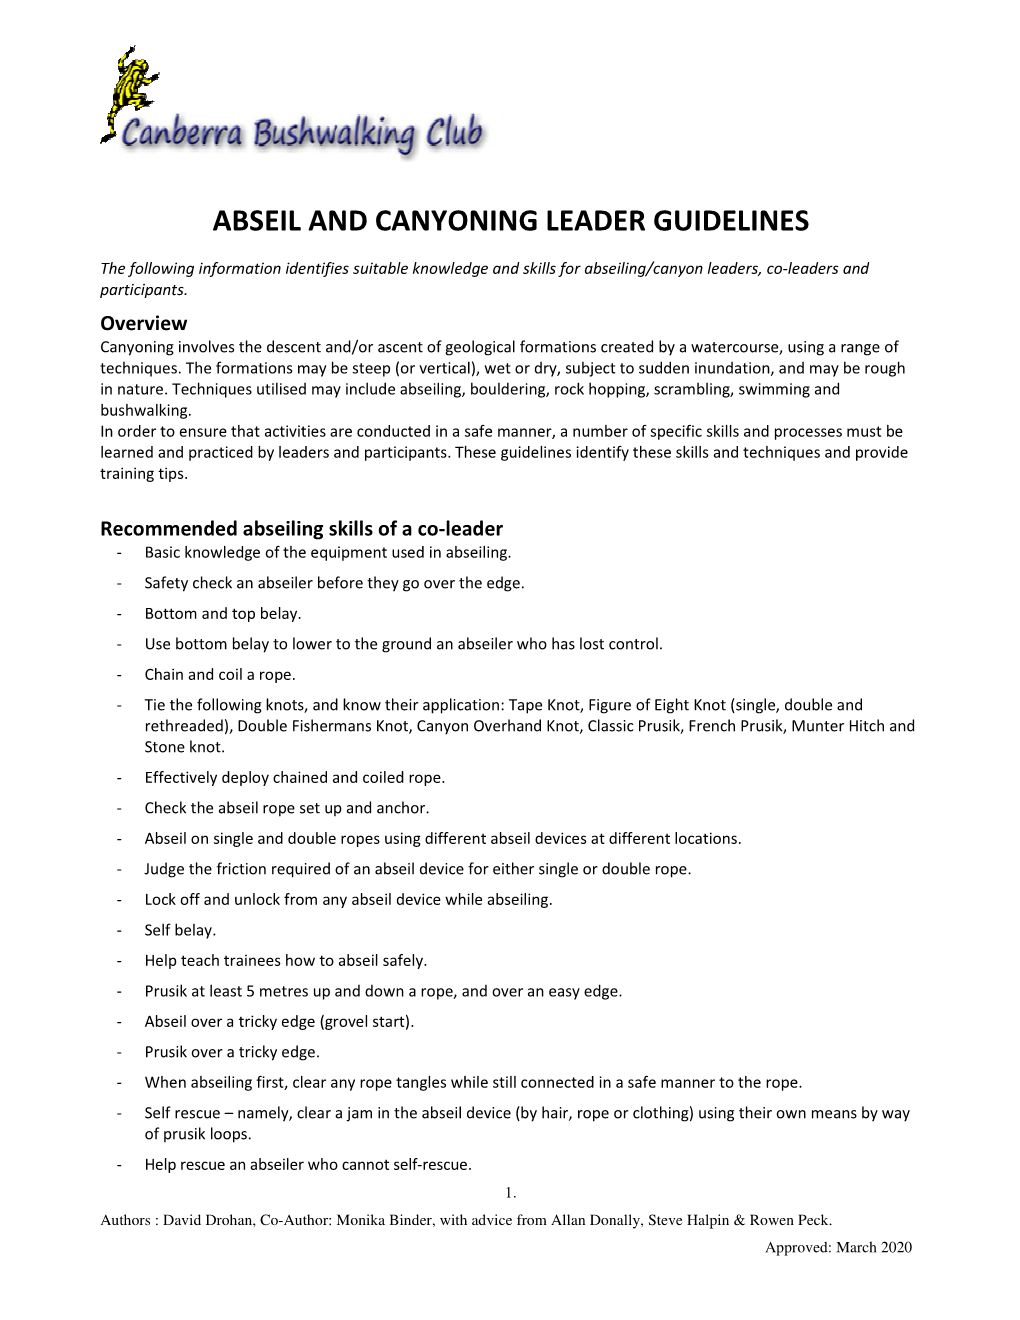 Abseil and Canyoning Leader Guidelines